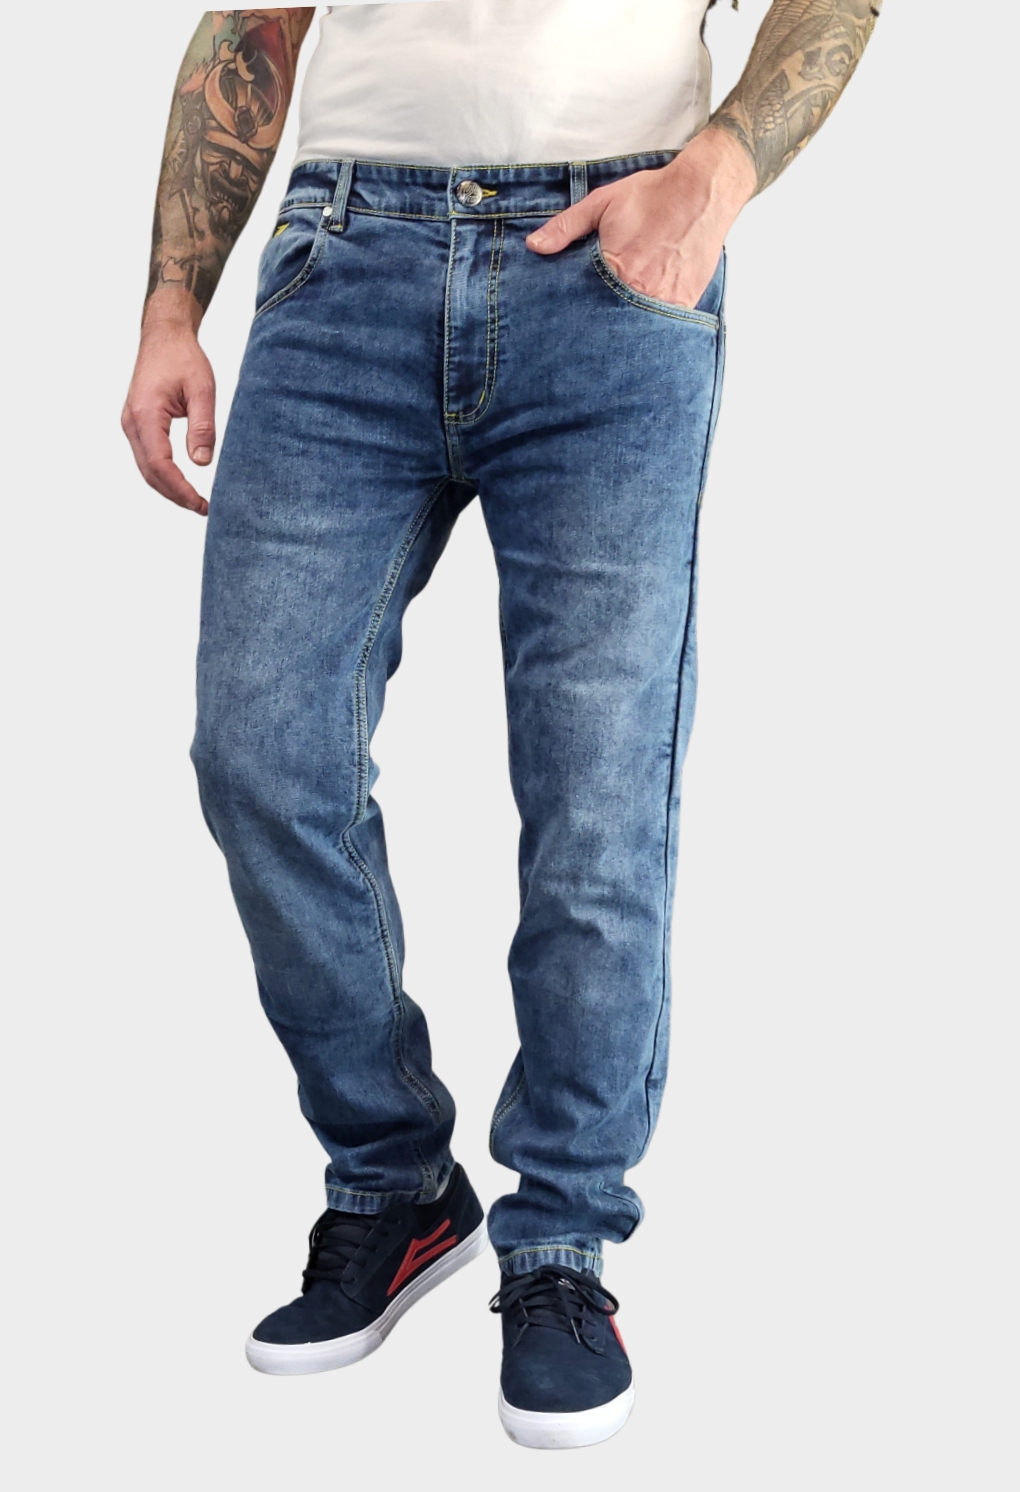 Motorcycle Jeans with Kevlar